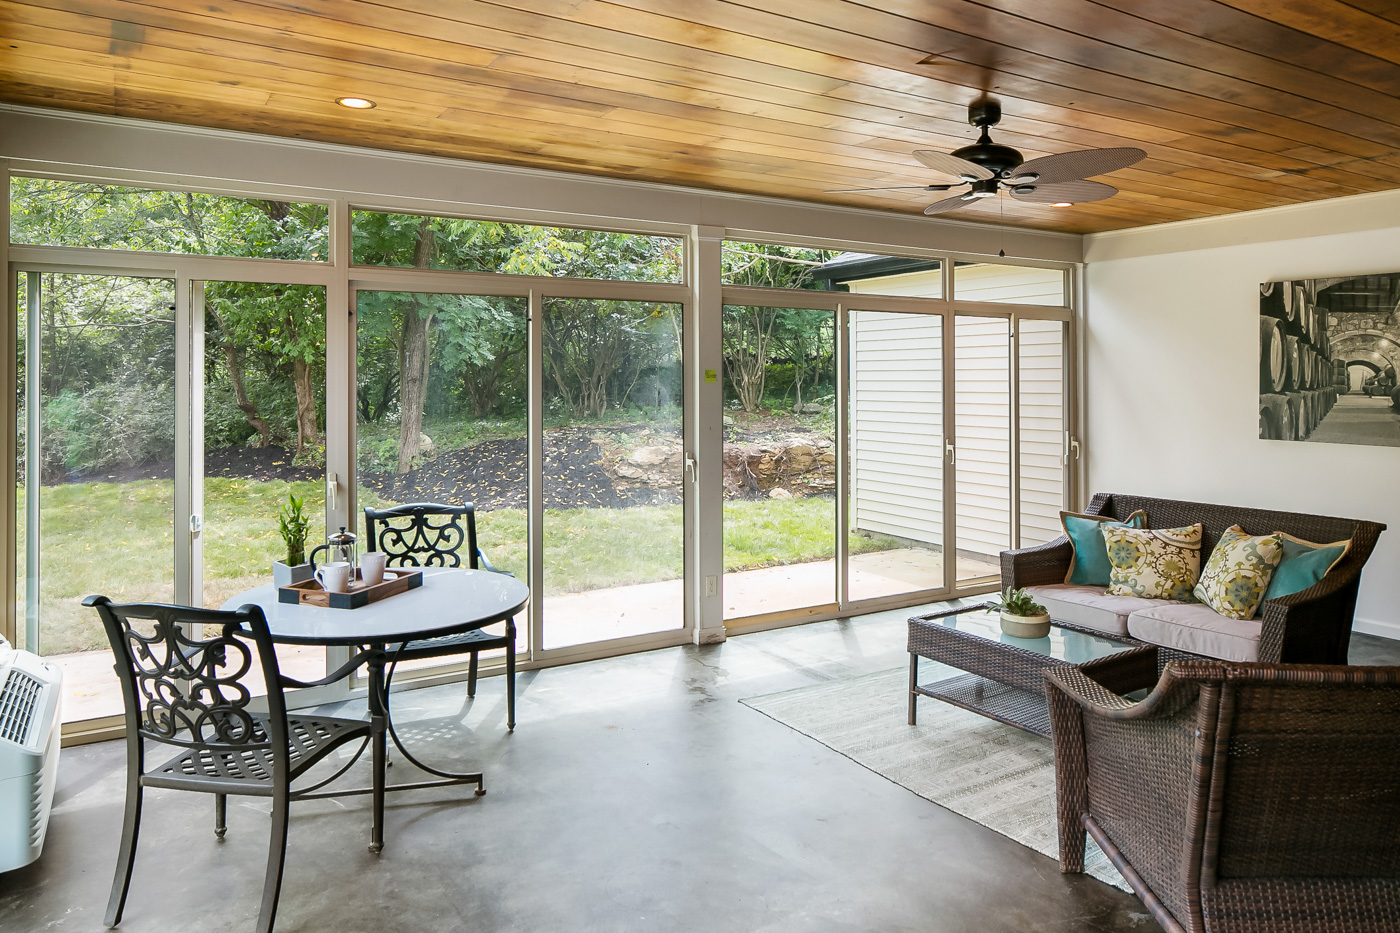 Glassed-in, fully climate-controlled sunroom